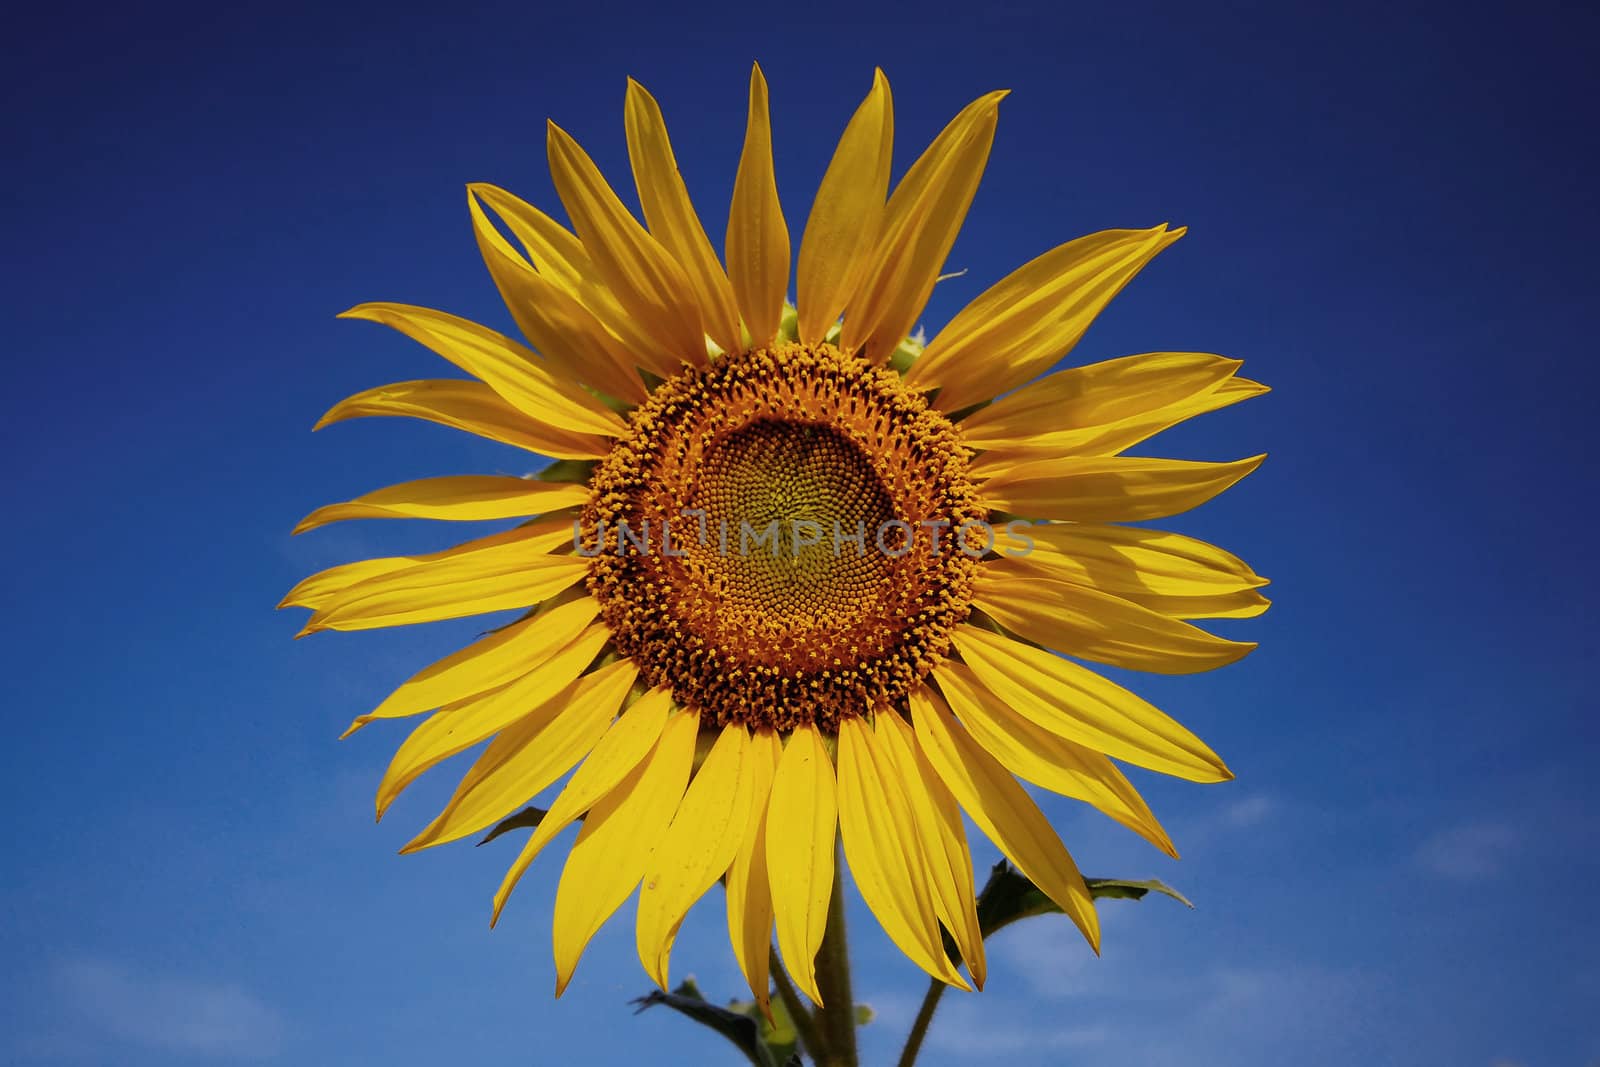 A round yellow sunflower isolated from blue sky